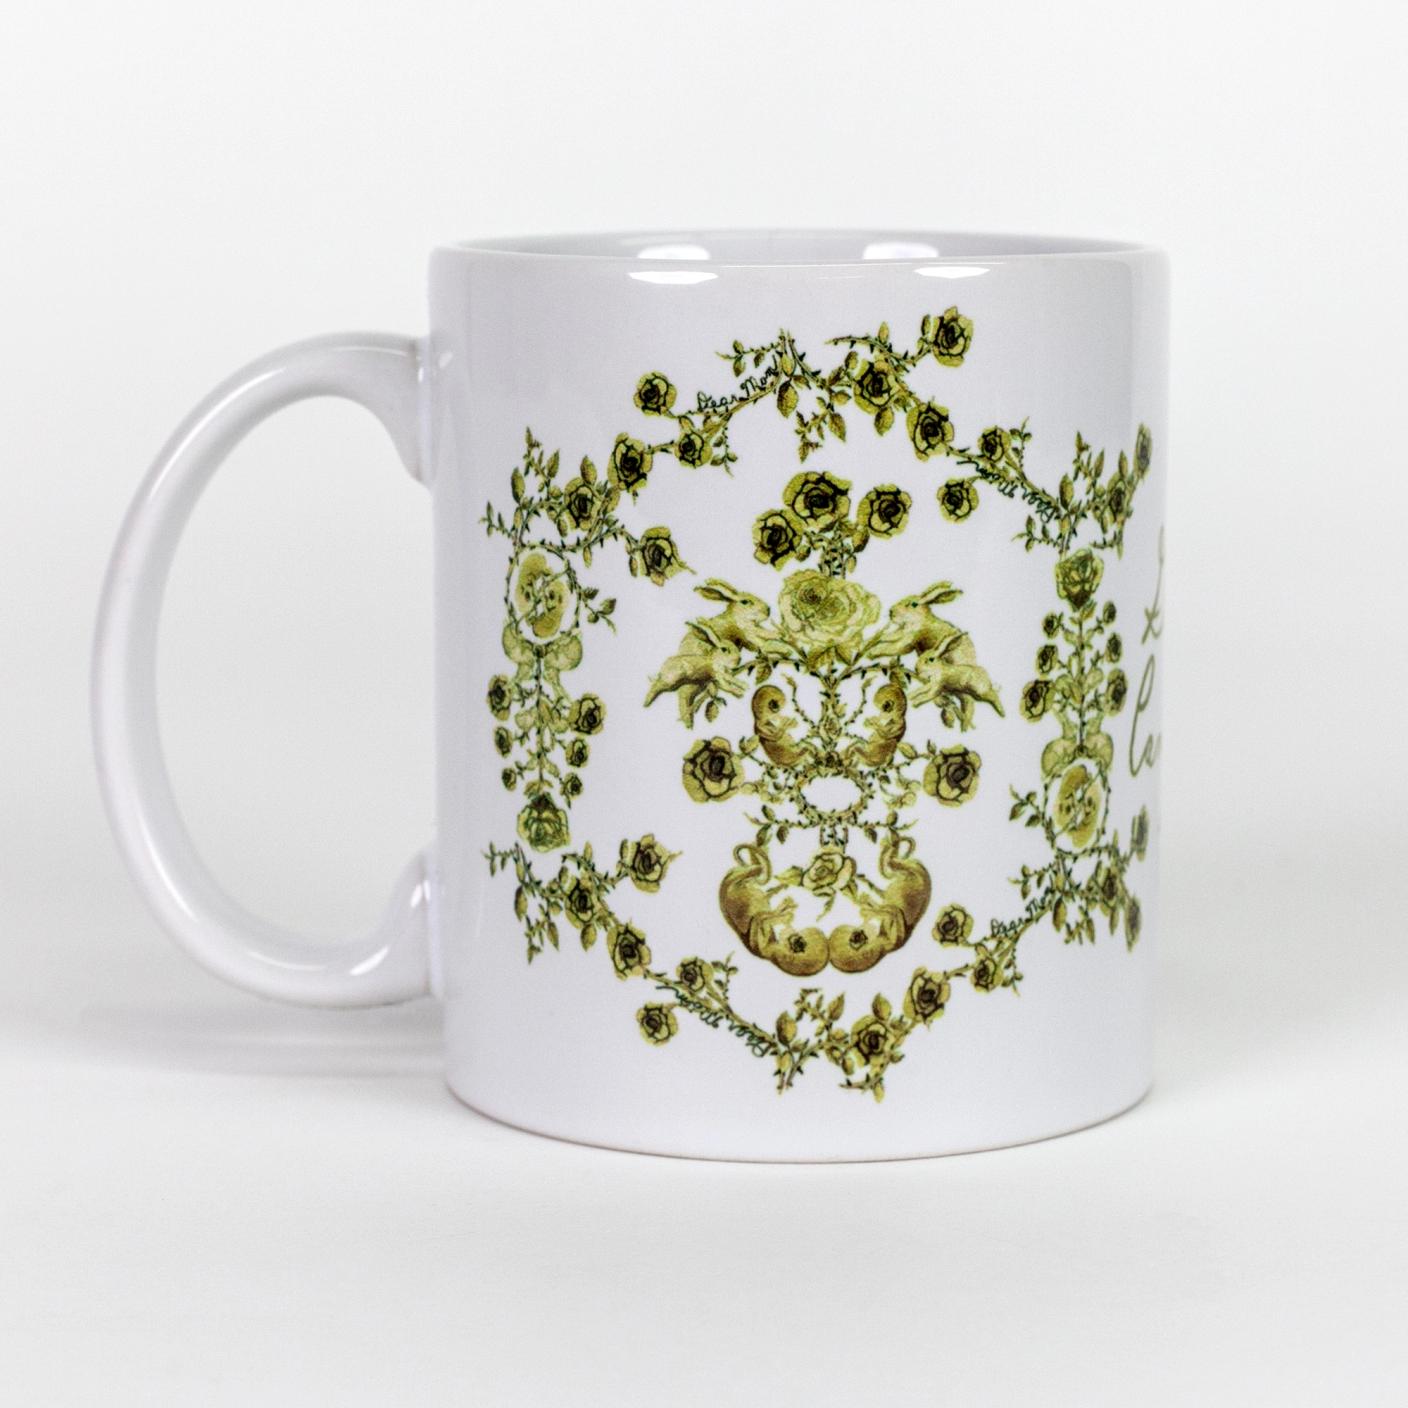 A white ceramic mug featuring a hand illustrated green toile-like pattern made up mostly of roses but also features twin fetuses and rabbits. "you are worthy" is written in green script on the top inside lip of the mug.